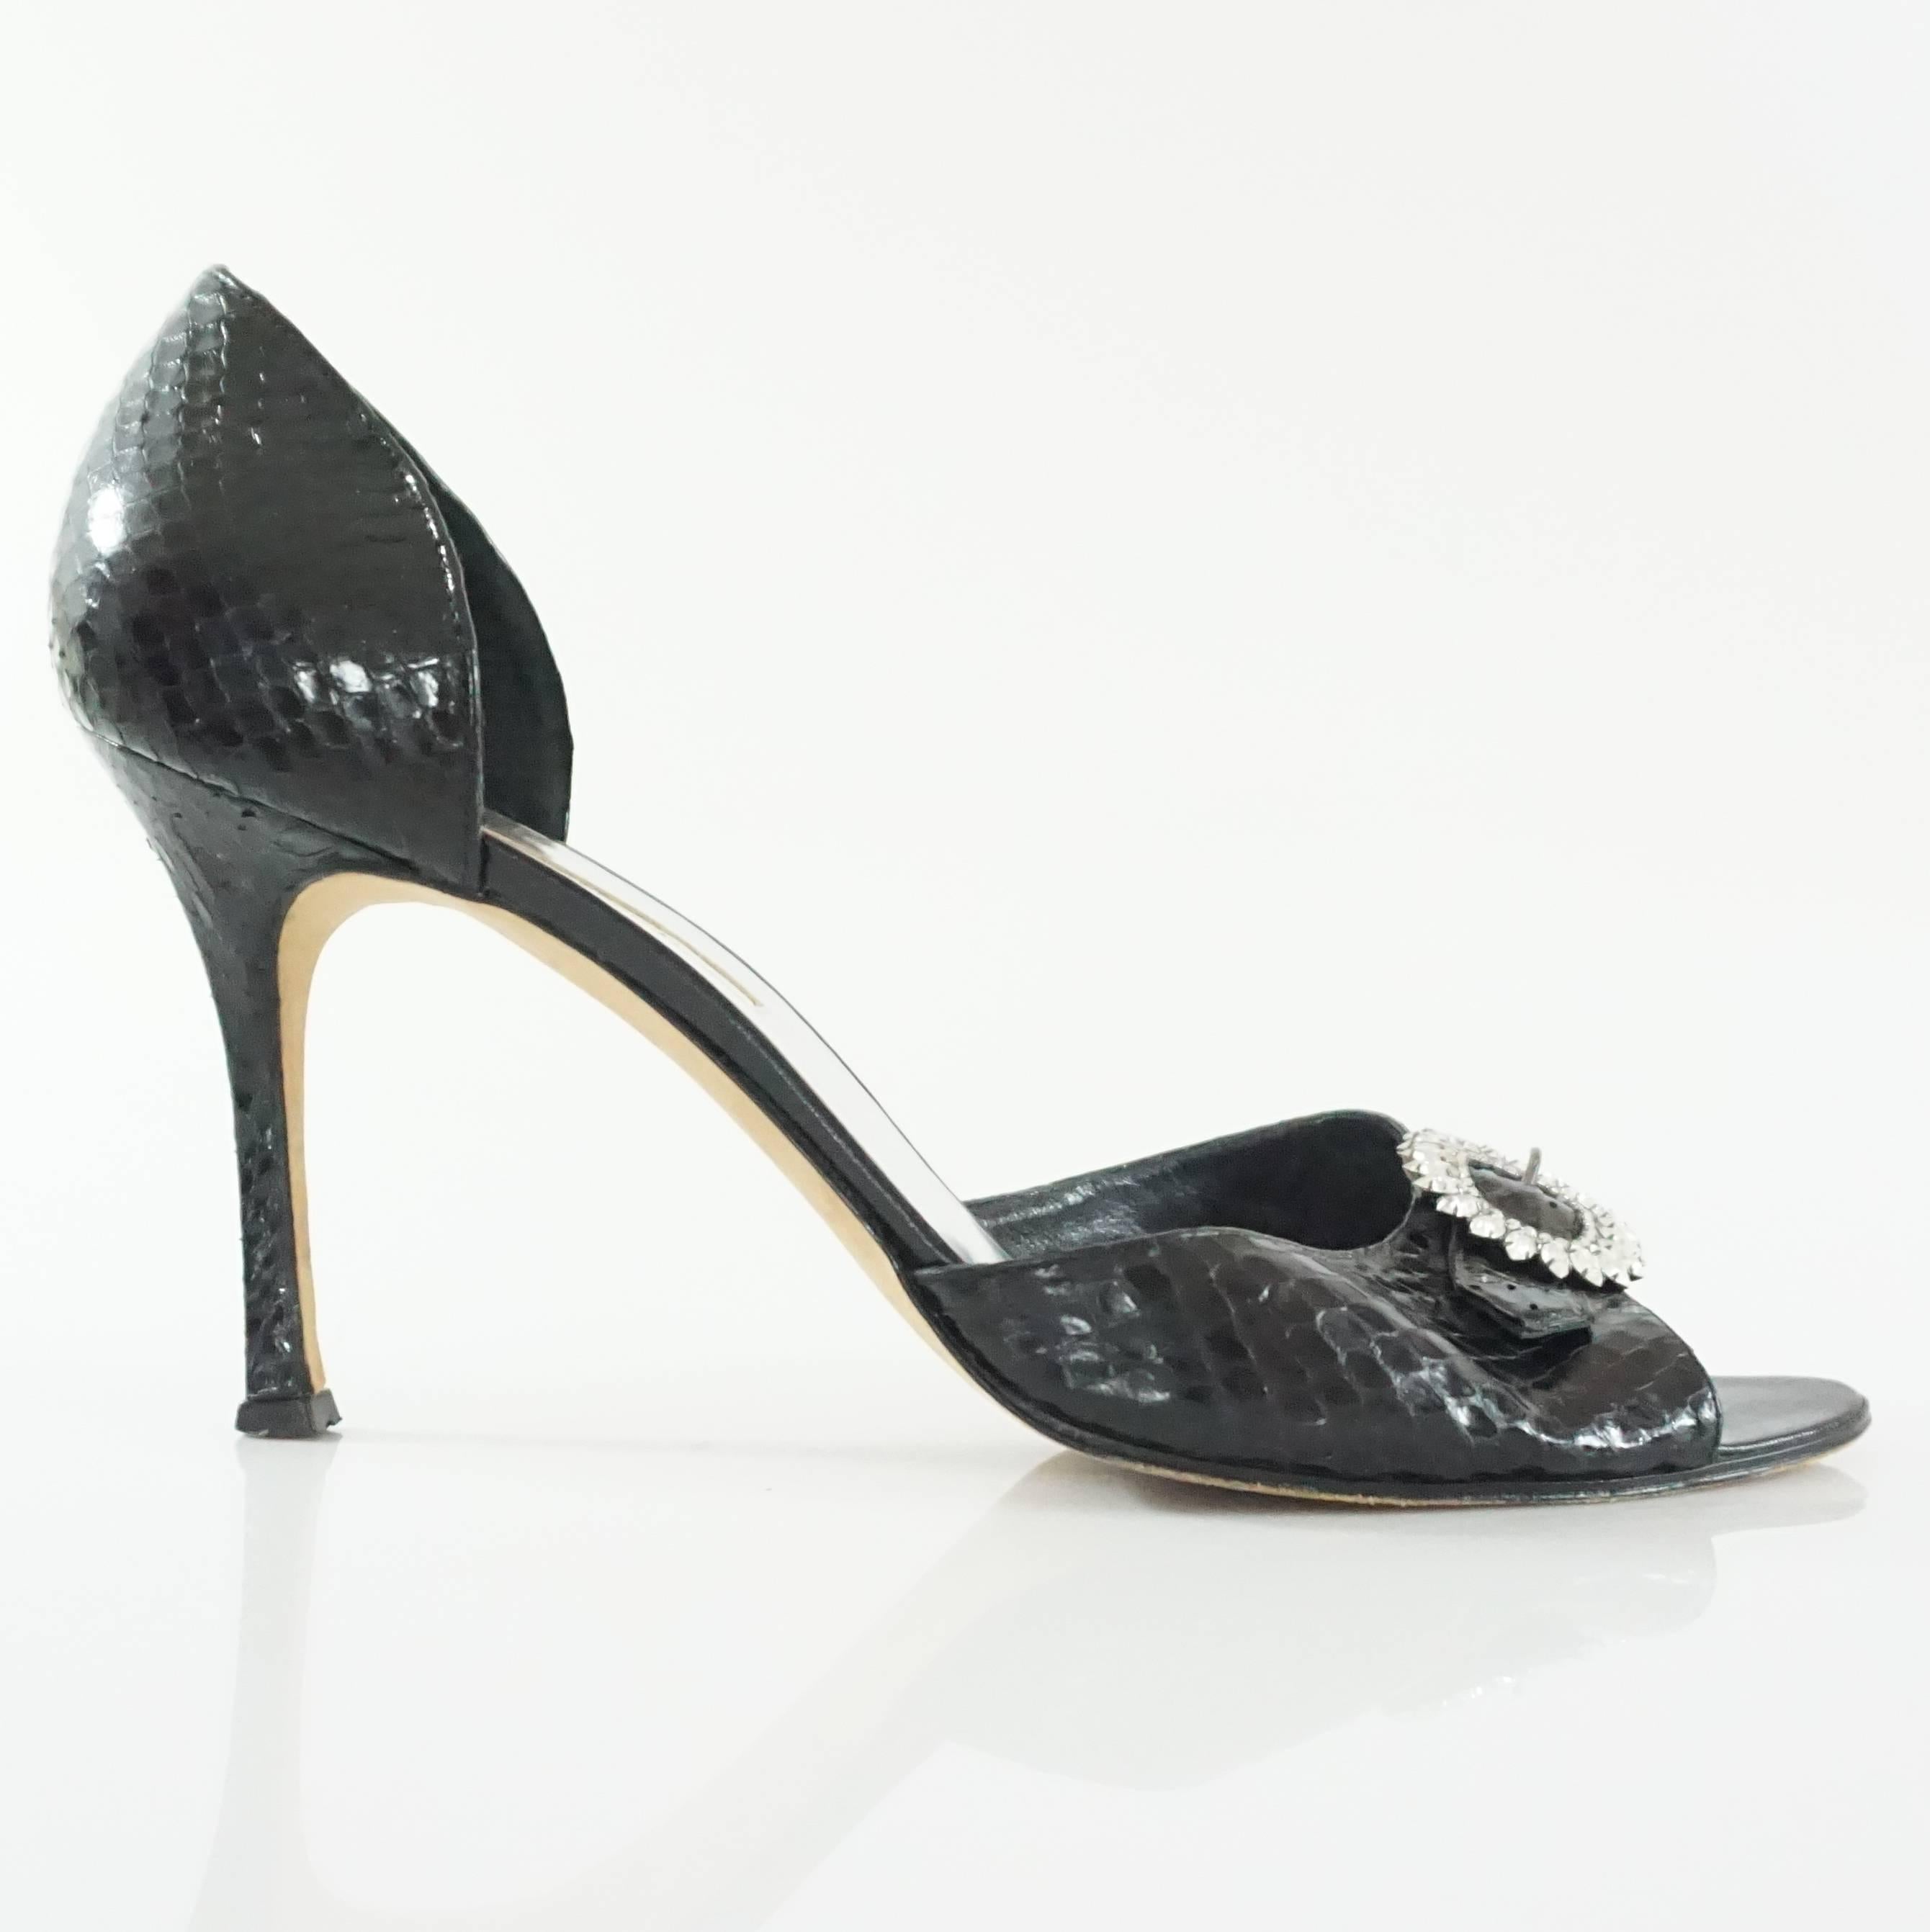 These Manolo Blahnik black snake heels are a d'orsay style and have a rhinestone encrusted buckle by the toe bed. They are in excellent condition with minimal wear on the bottom. Size 41. 

Measurements
Platform: 0.5"
Heel: 3.75"